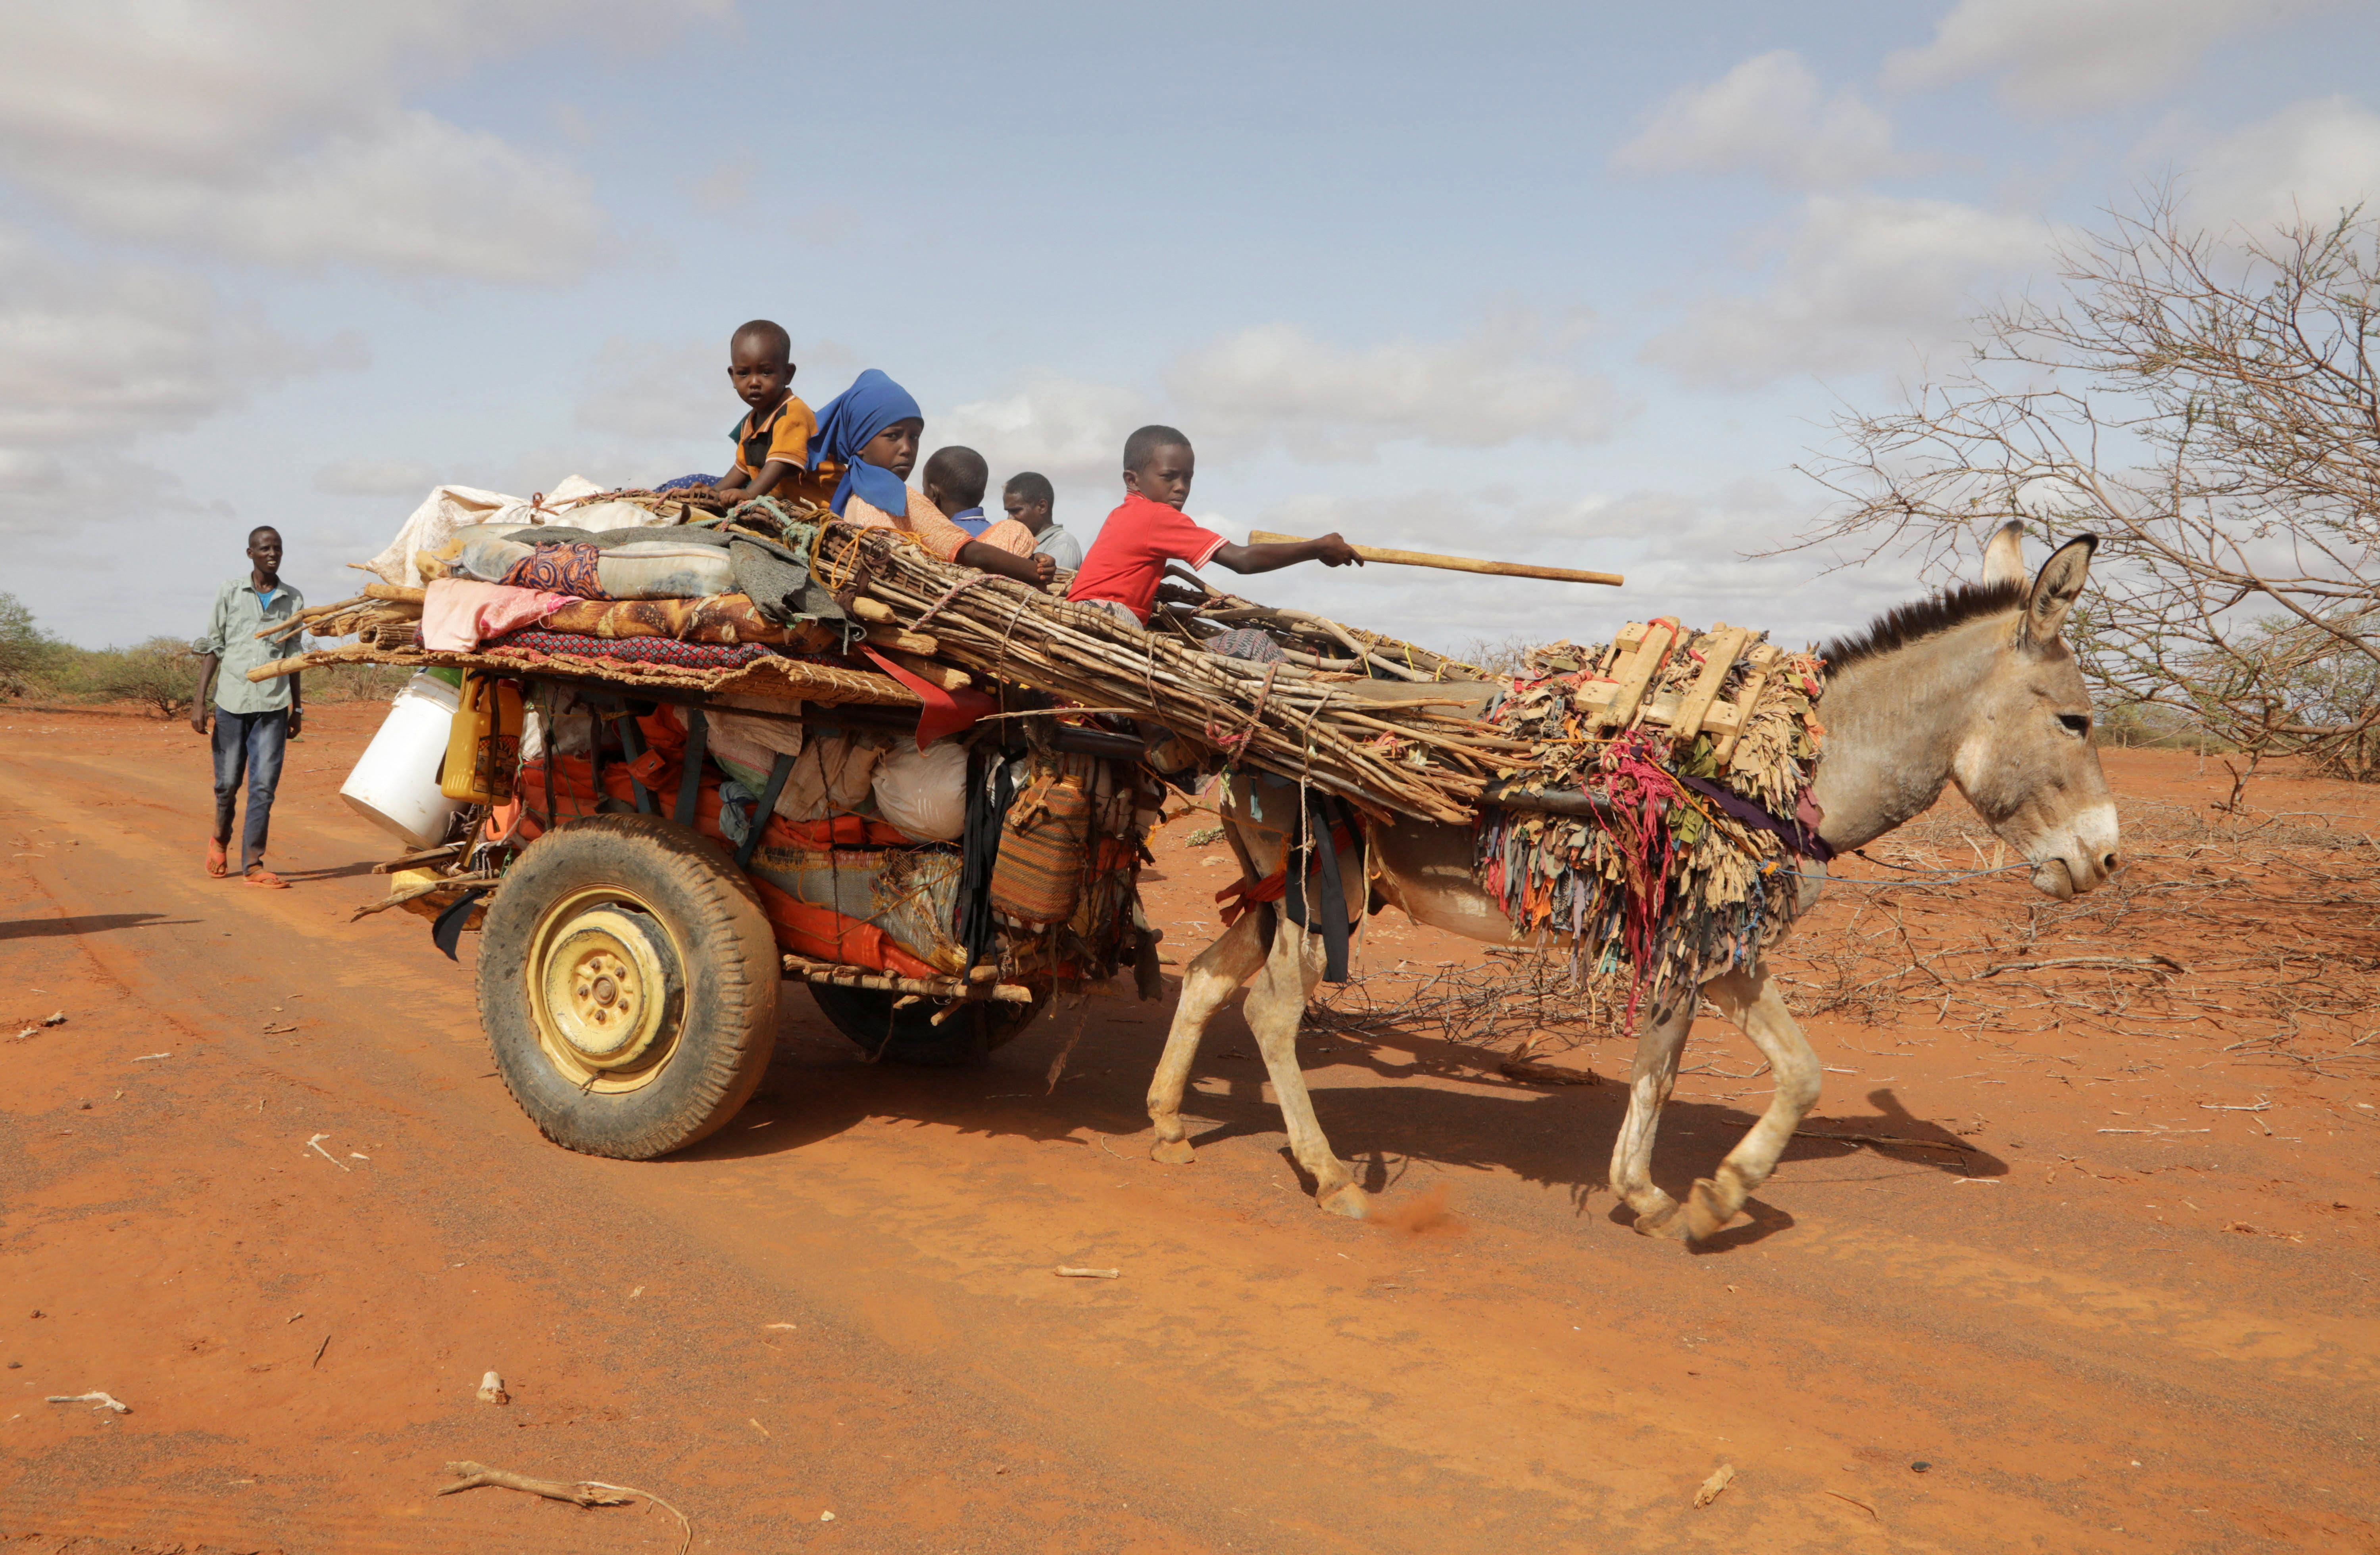 Internally displaced Somali children ride on a donkey cart, as they flee from the severe droughts near Dollow